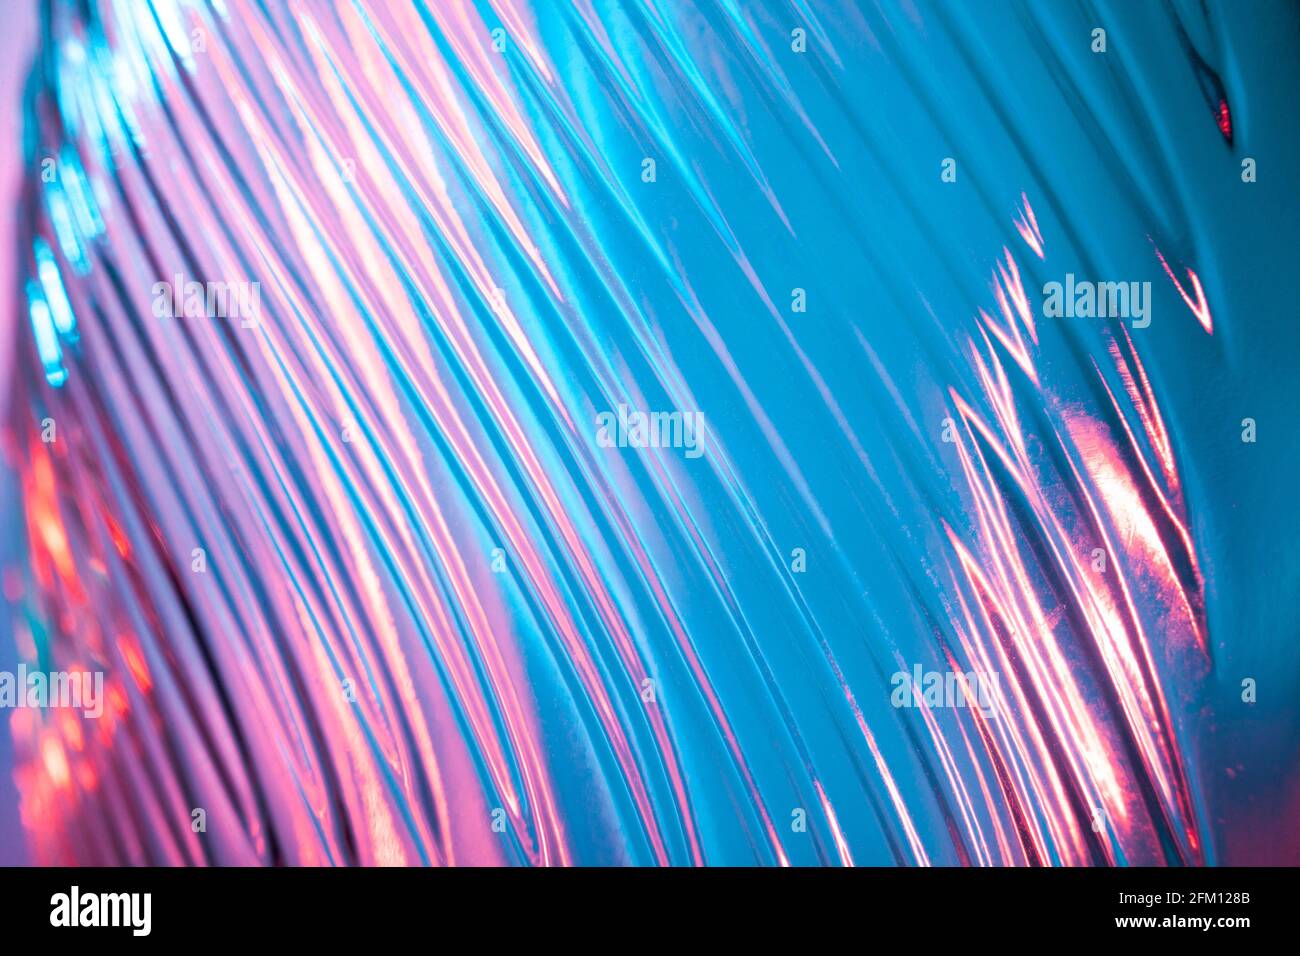 Abstract glass background. Texture of wavy glass illuminated with multi-colored light. Pink and blue stains. Close up. Flares on glass Stock Photo